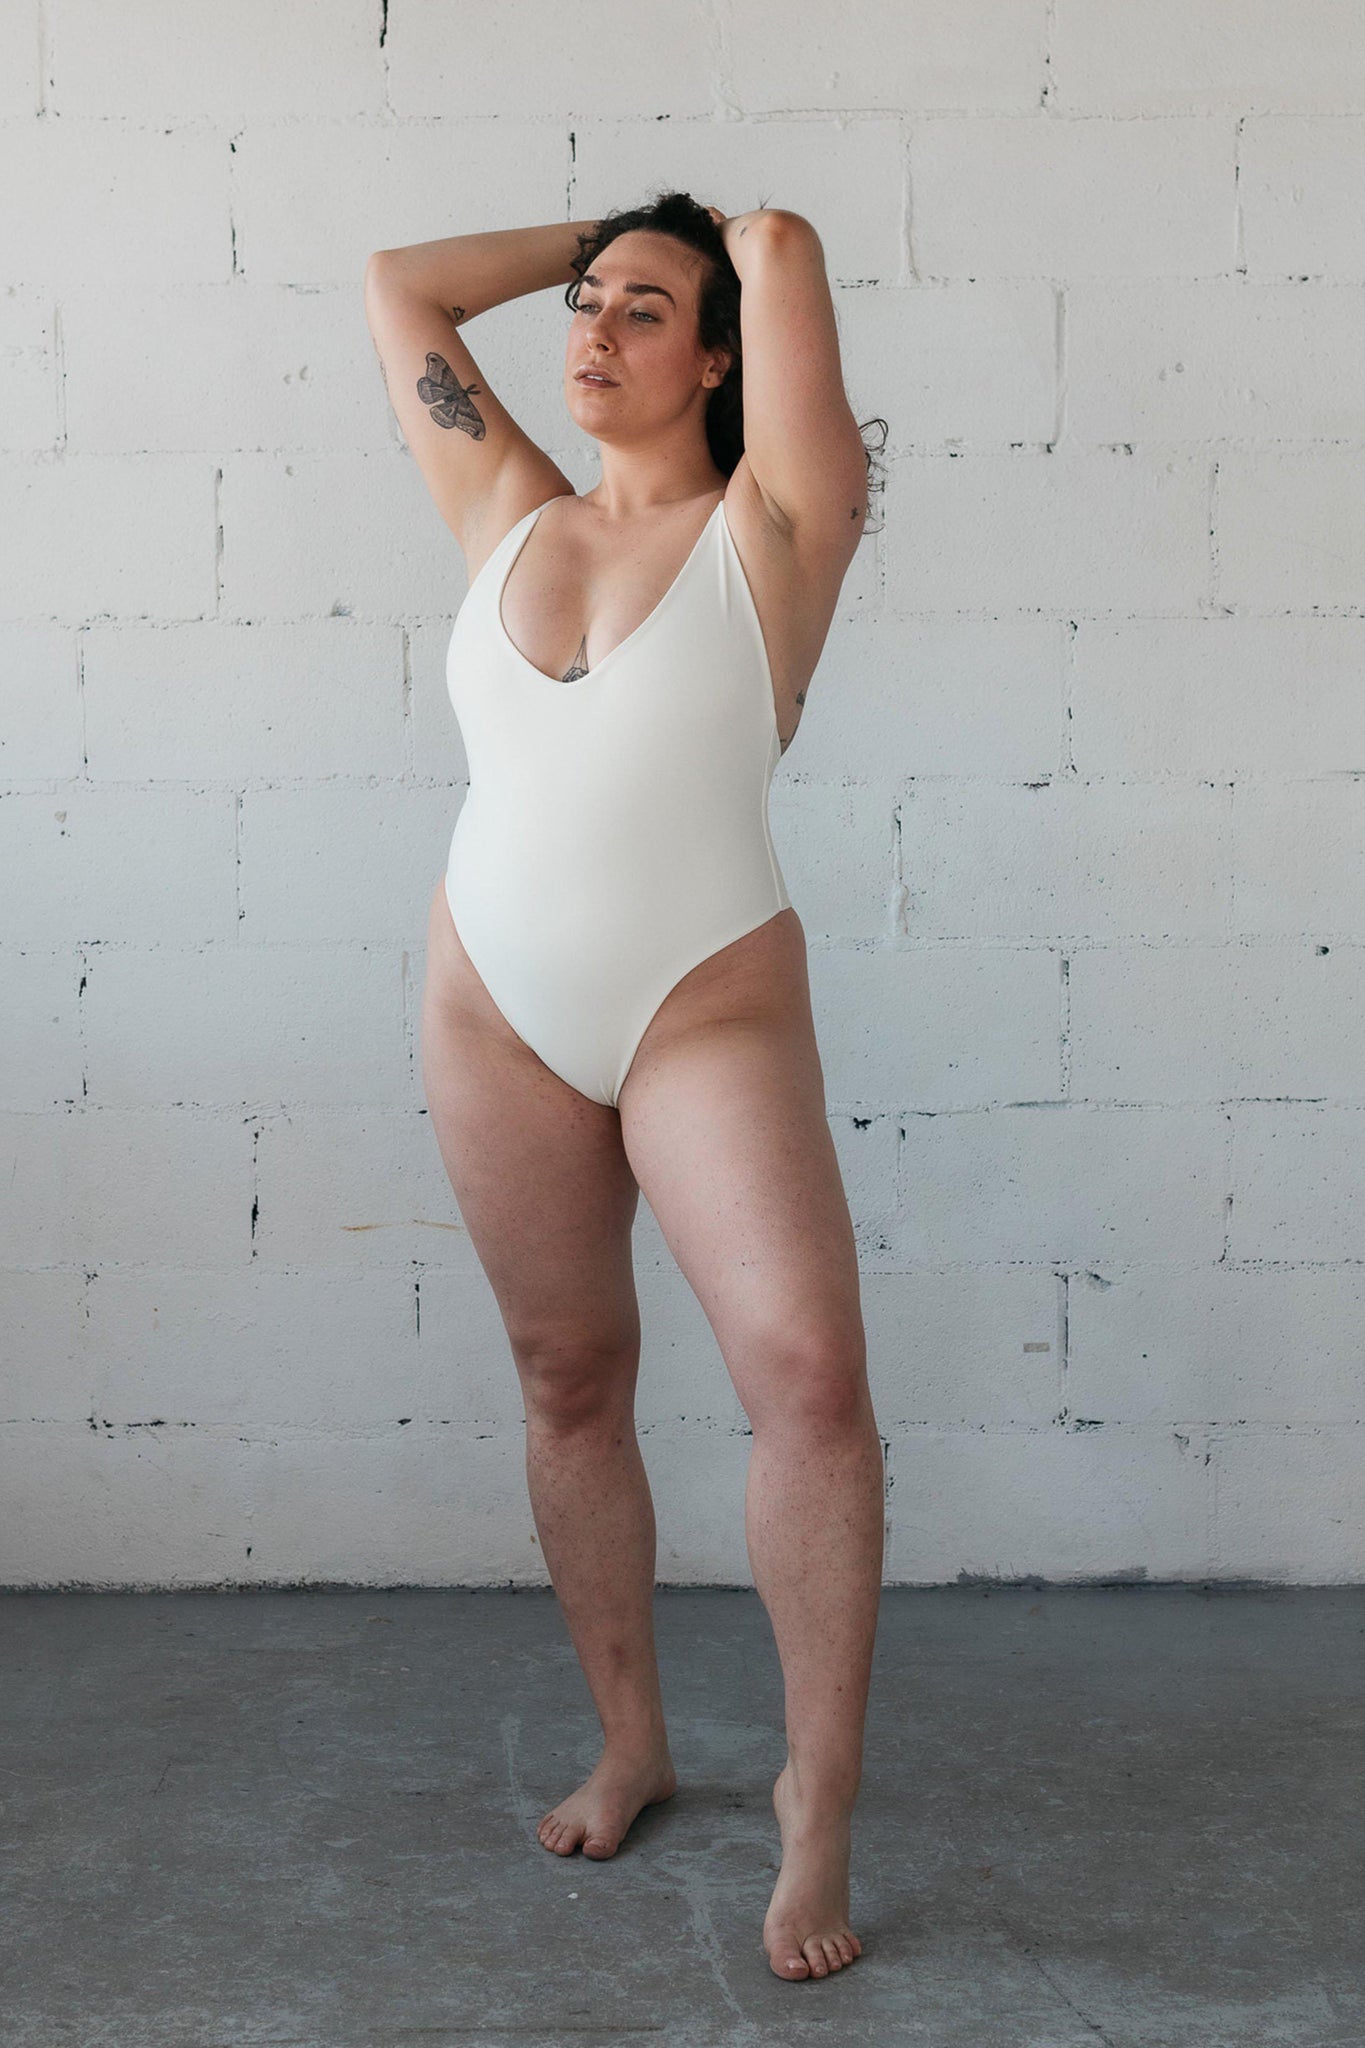 Woman standing with her hands on her head wearing a white one-piece swimsuit featuring a low cut neckline and spaghetti straps.